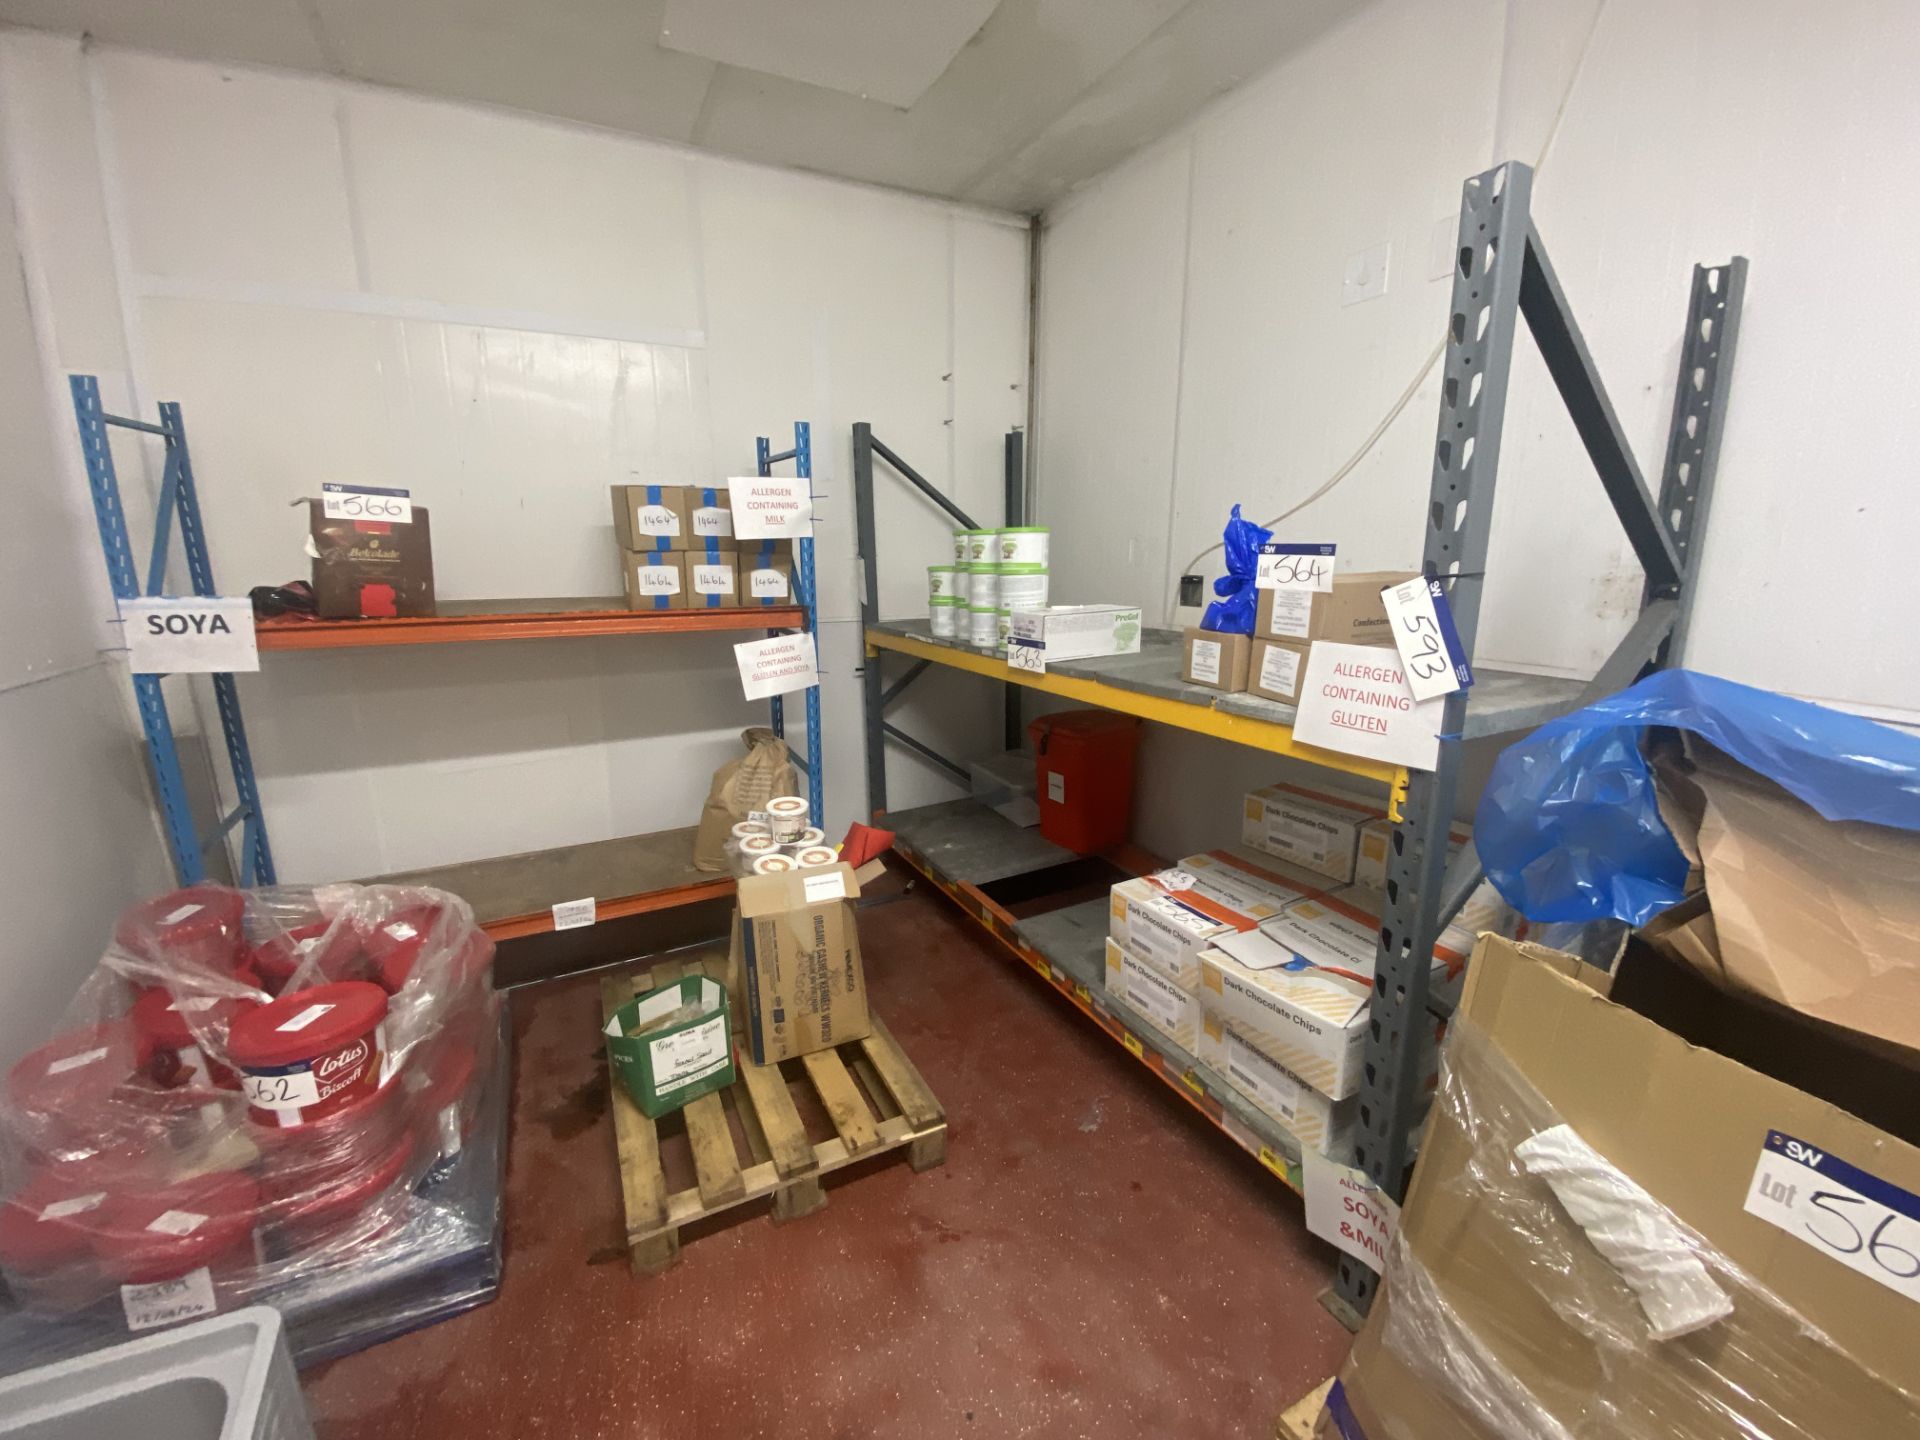 Single Bay Two Tier Pallet Rack (reserve removal until contents cleared) Please read the following